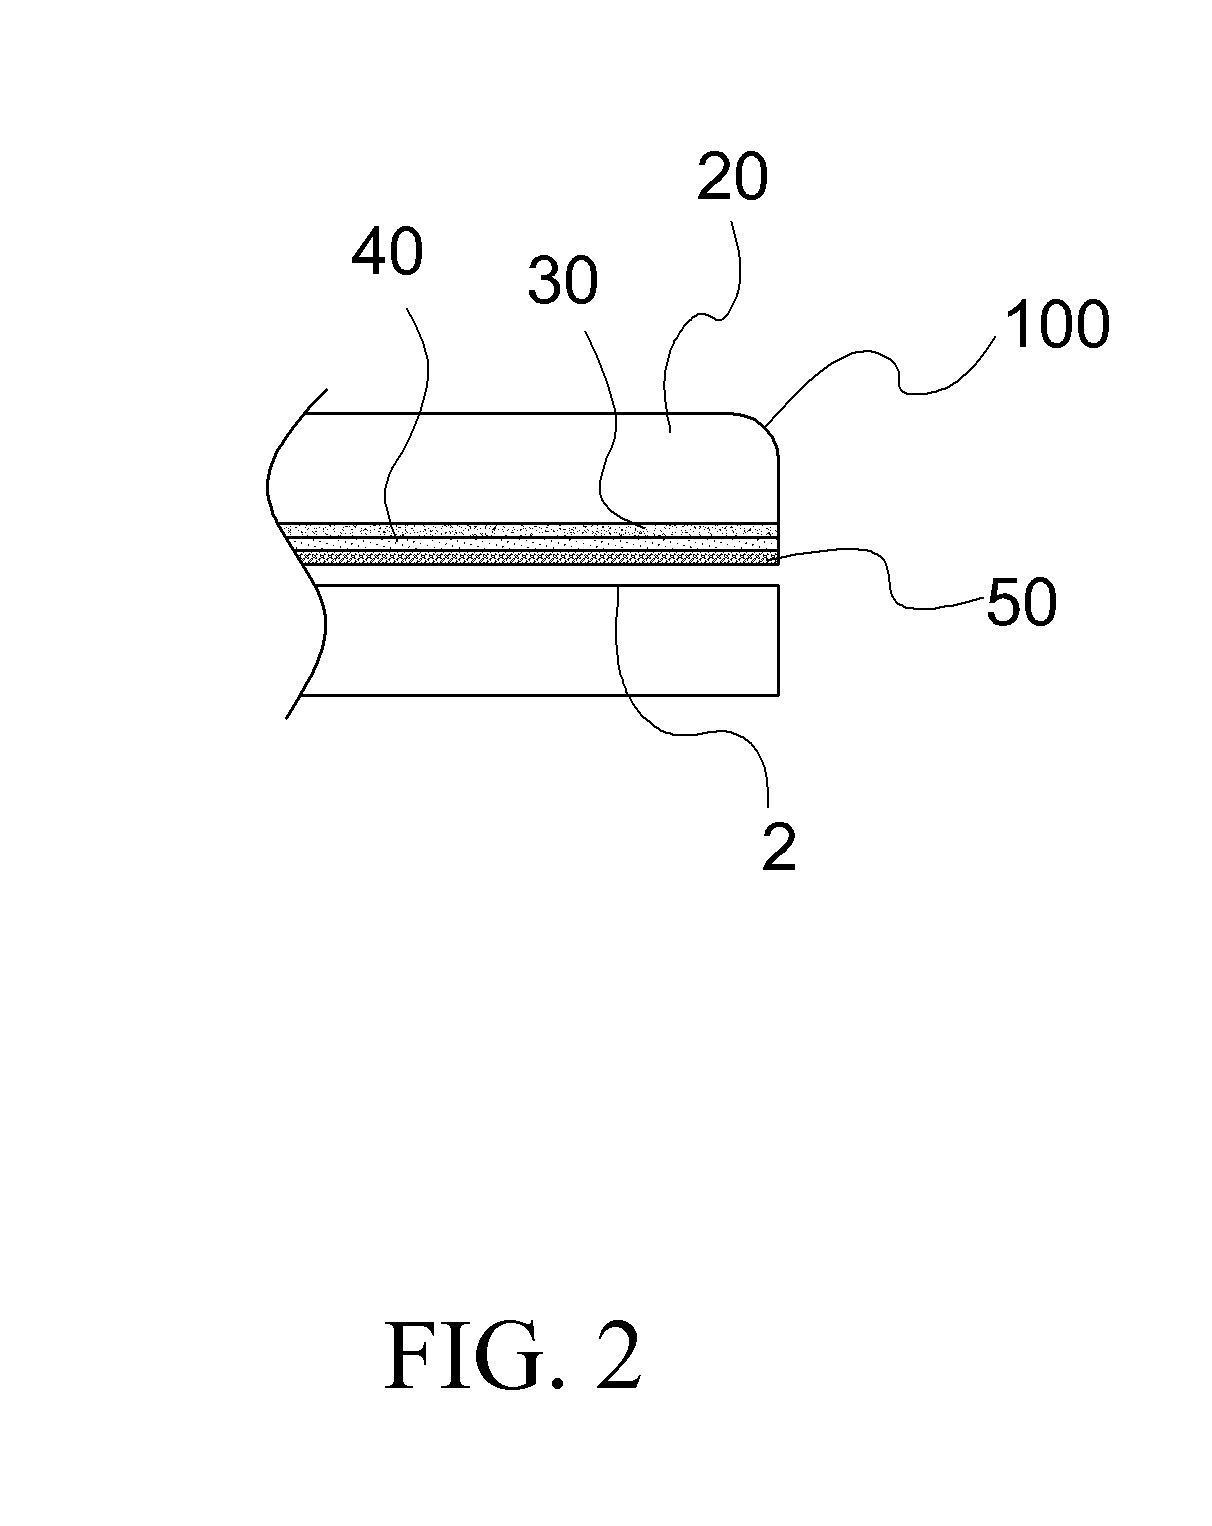 Protective film for portable electronic device using reinforced glass